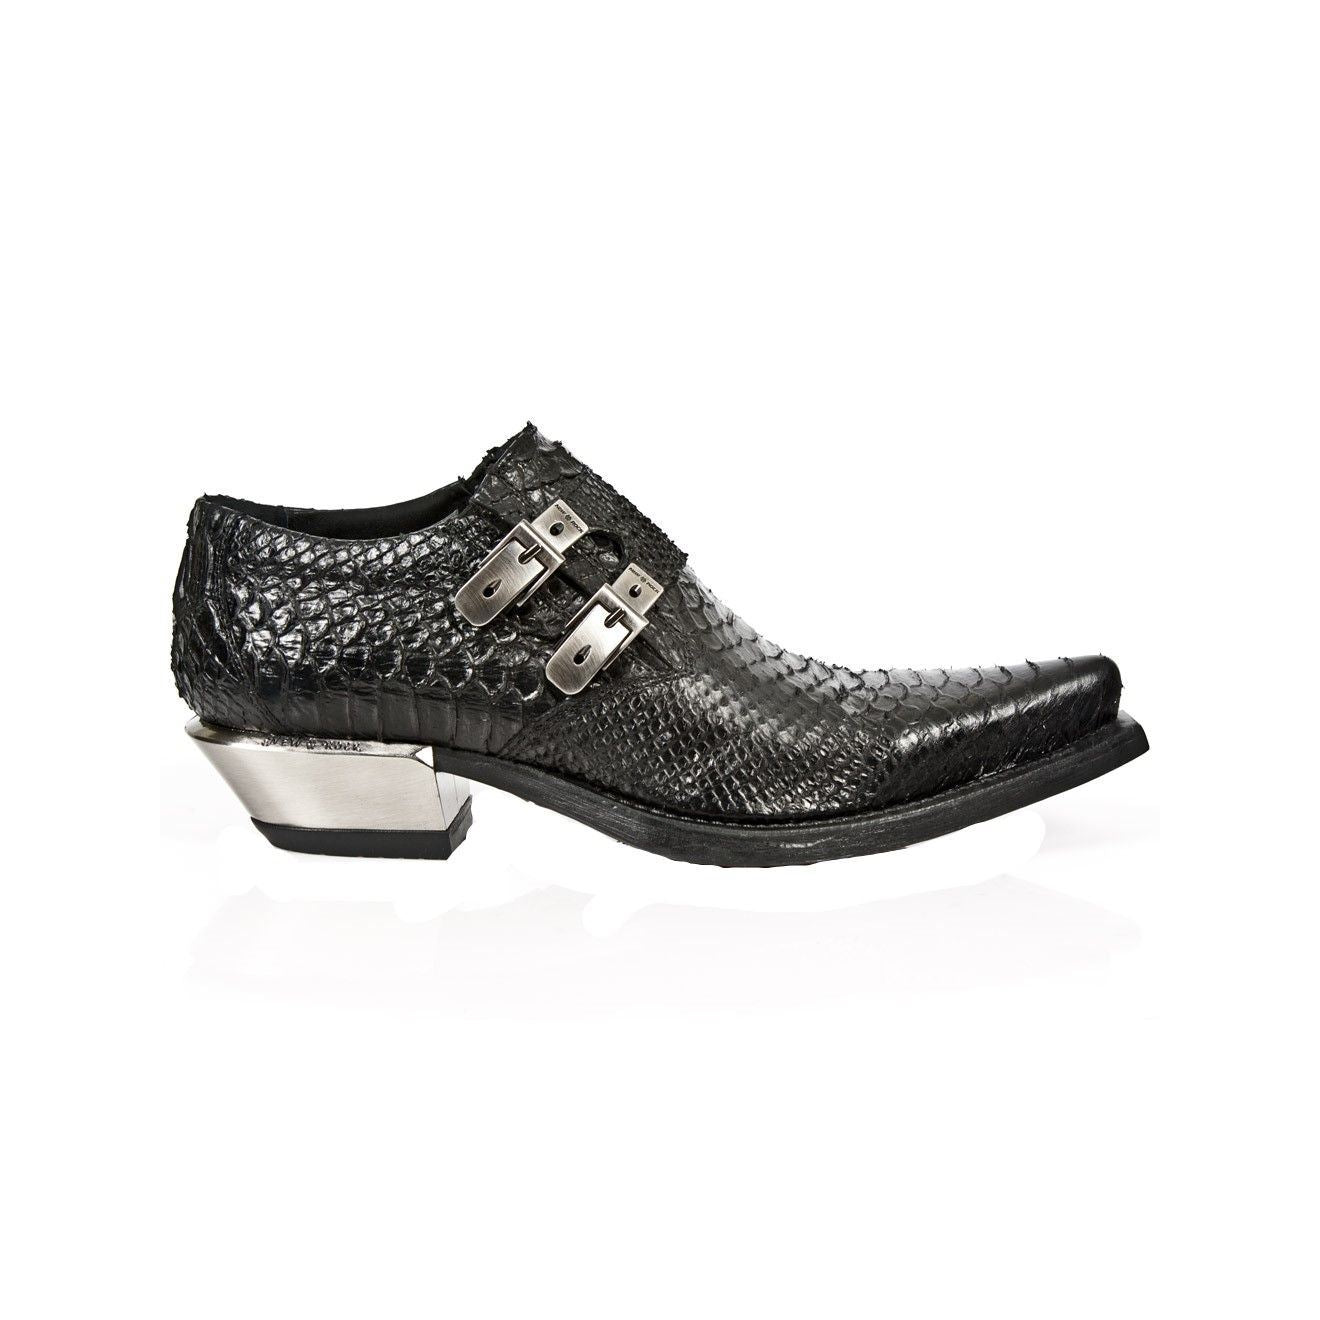 New Rock Embossed Python Black Leather Buckled Shoes-7934-S2